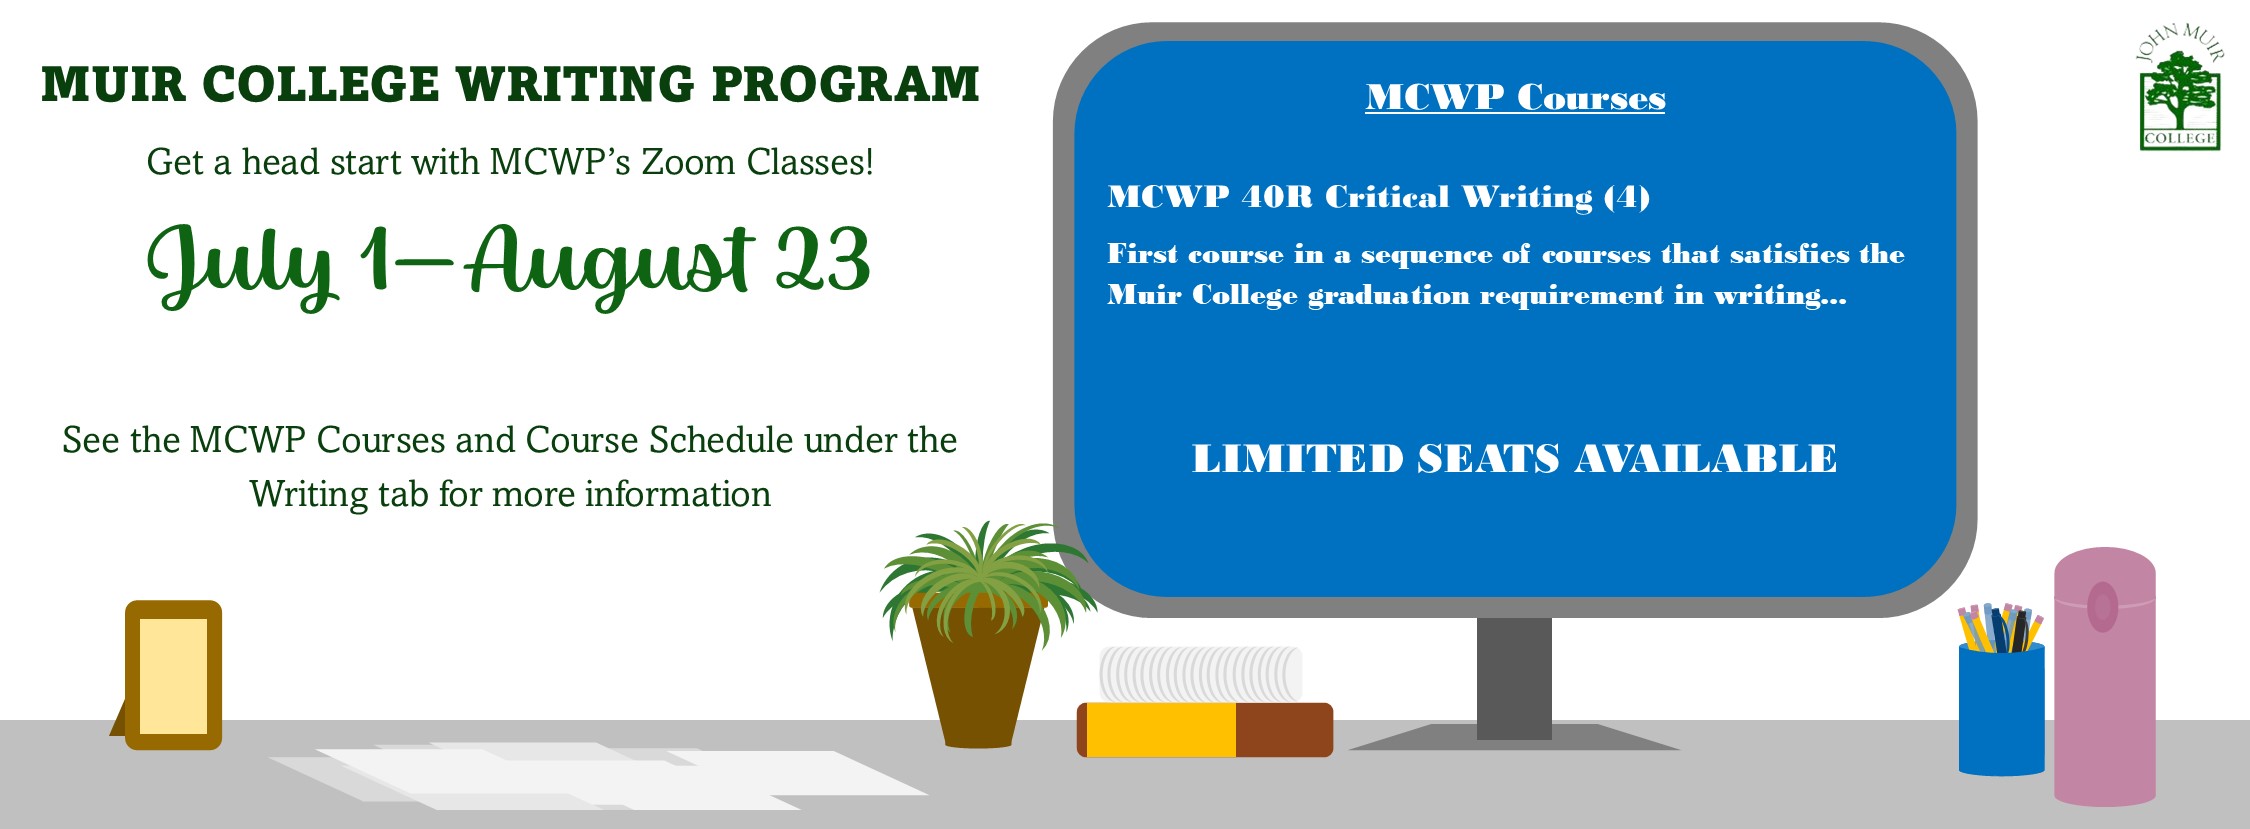 MCWP's Zoom Classes from July 1 - August 23